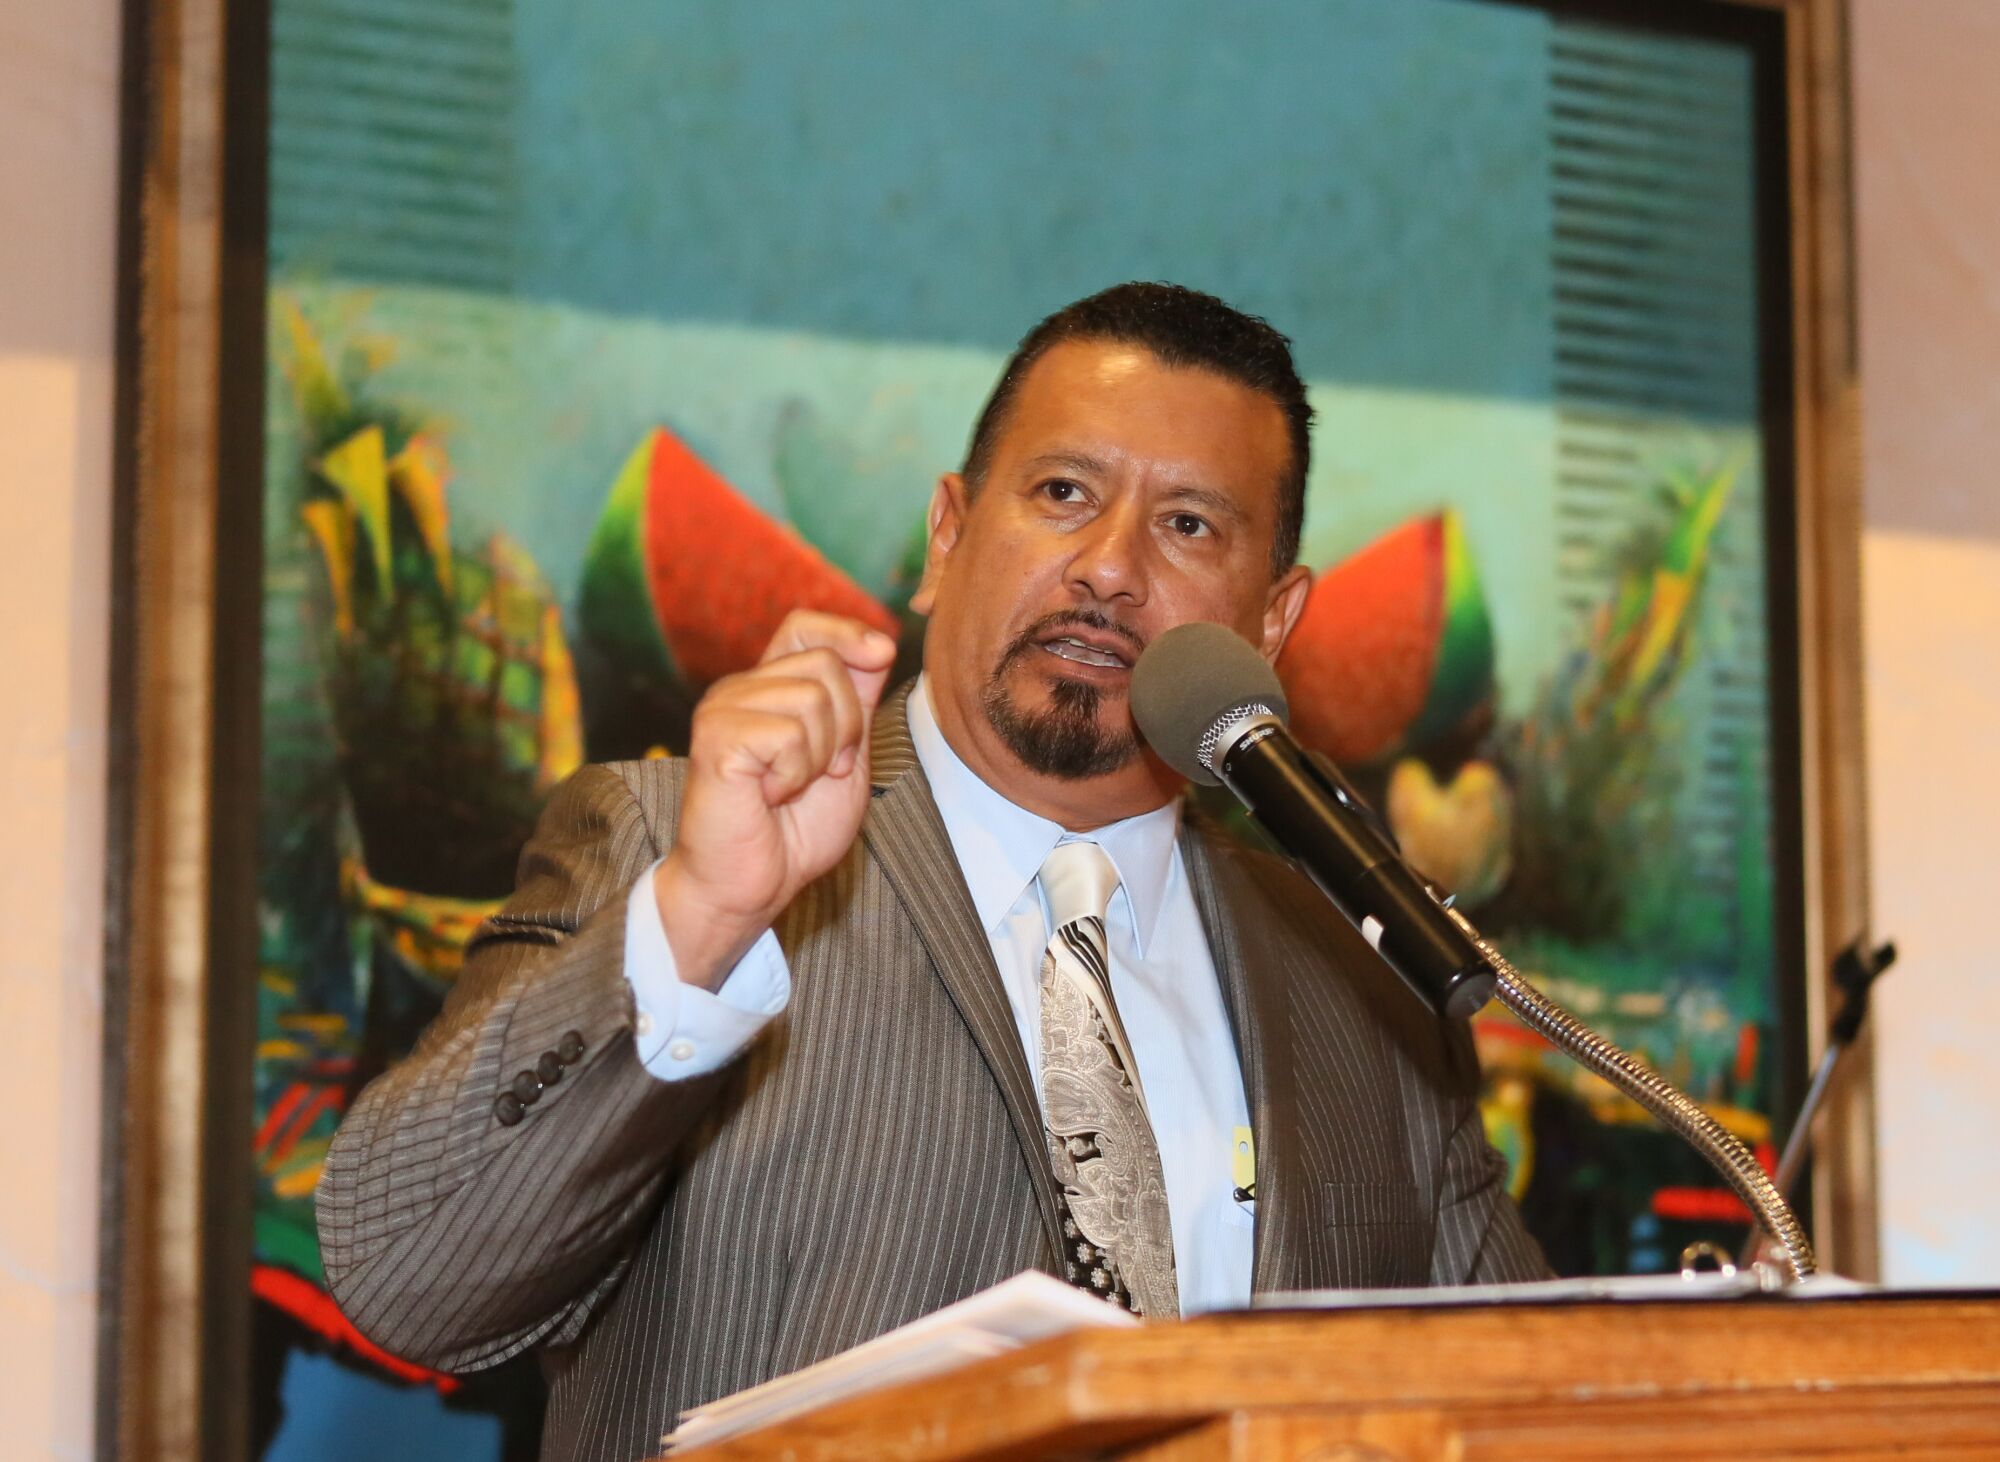 Richard Montañez speaks at a lectern in front of a painting